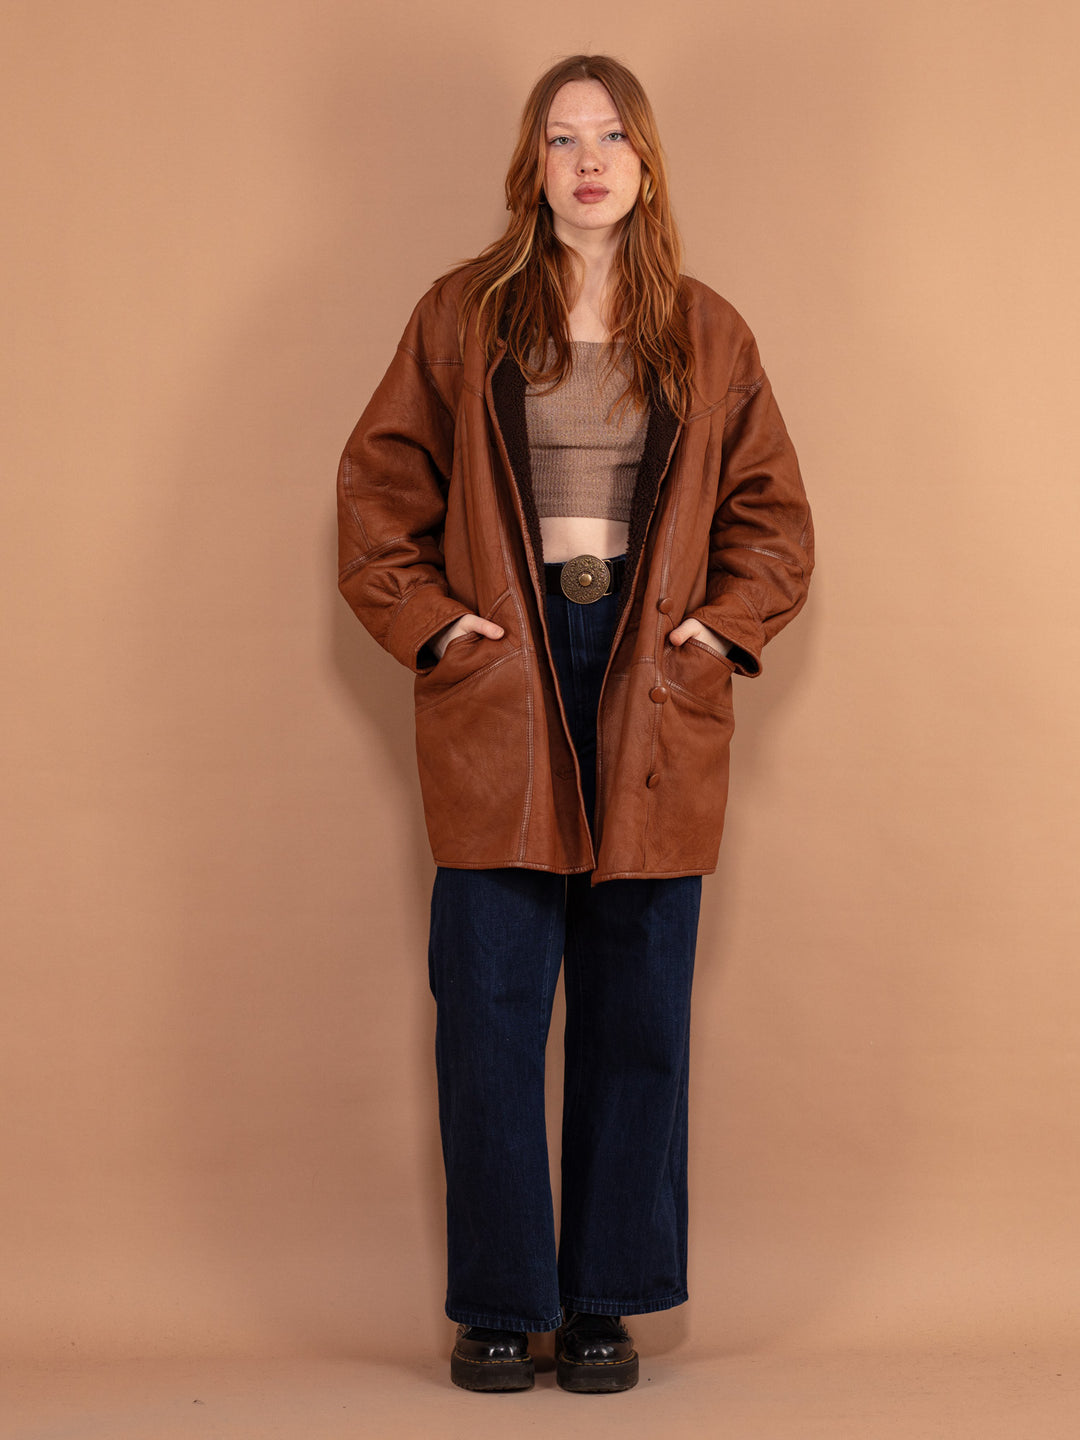 Oversized Sheepskin Coat 80's, Size L Brown Leather Coat, Women Shearling Overcoat, Vintage Outerwear, Sustainable Clothing, Worn in Coat